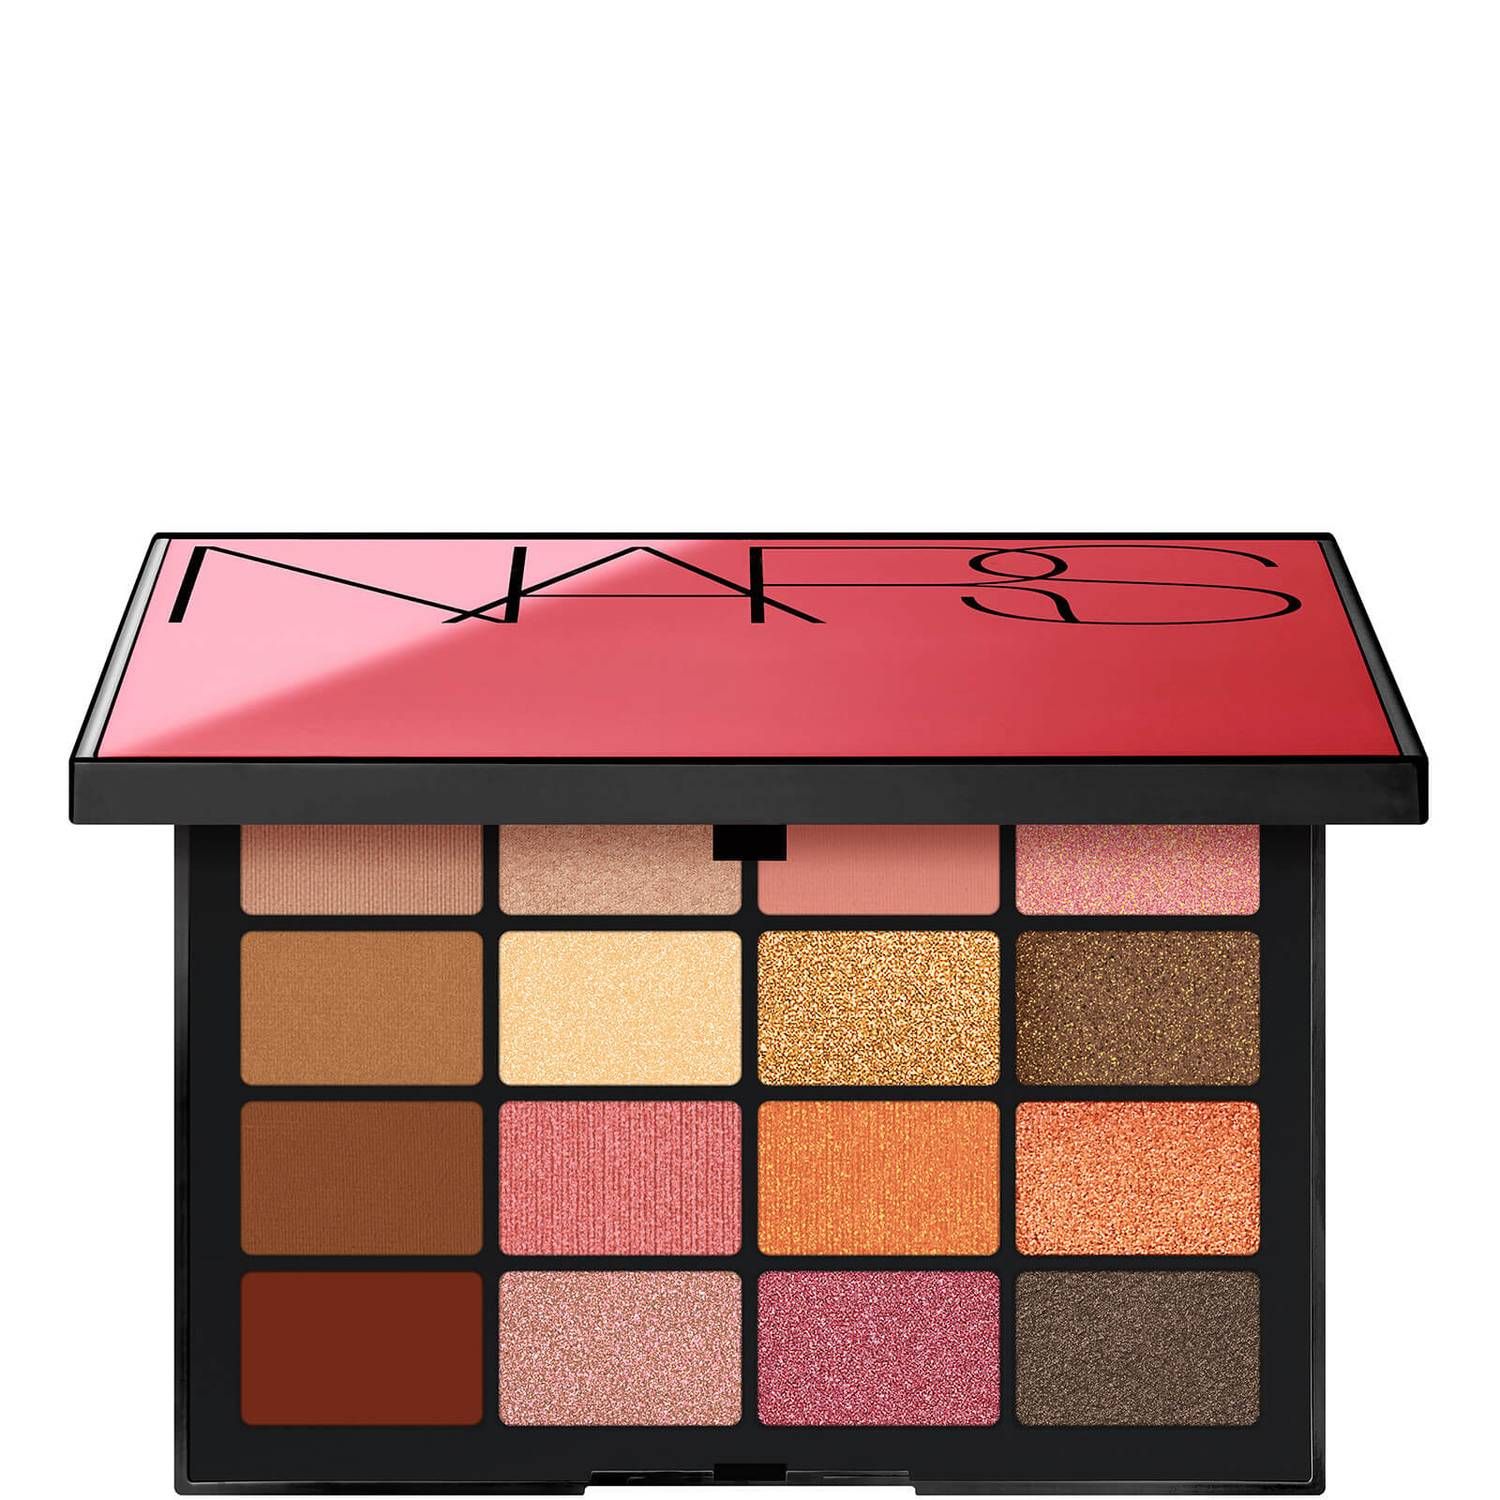 NARS Unrated Eyeshadow Palette | Cult Beauty